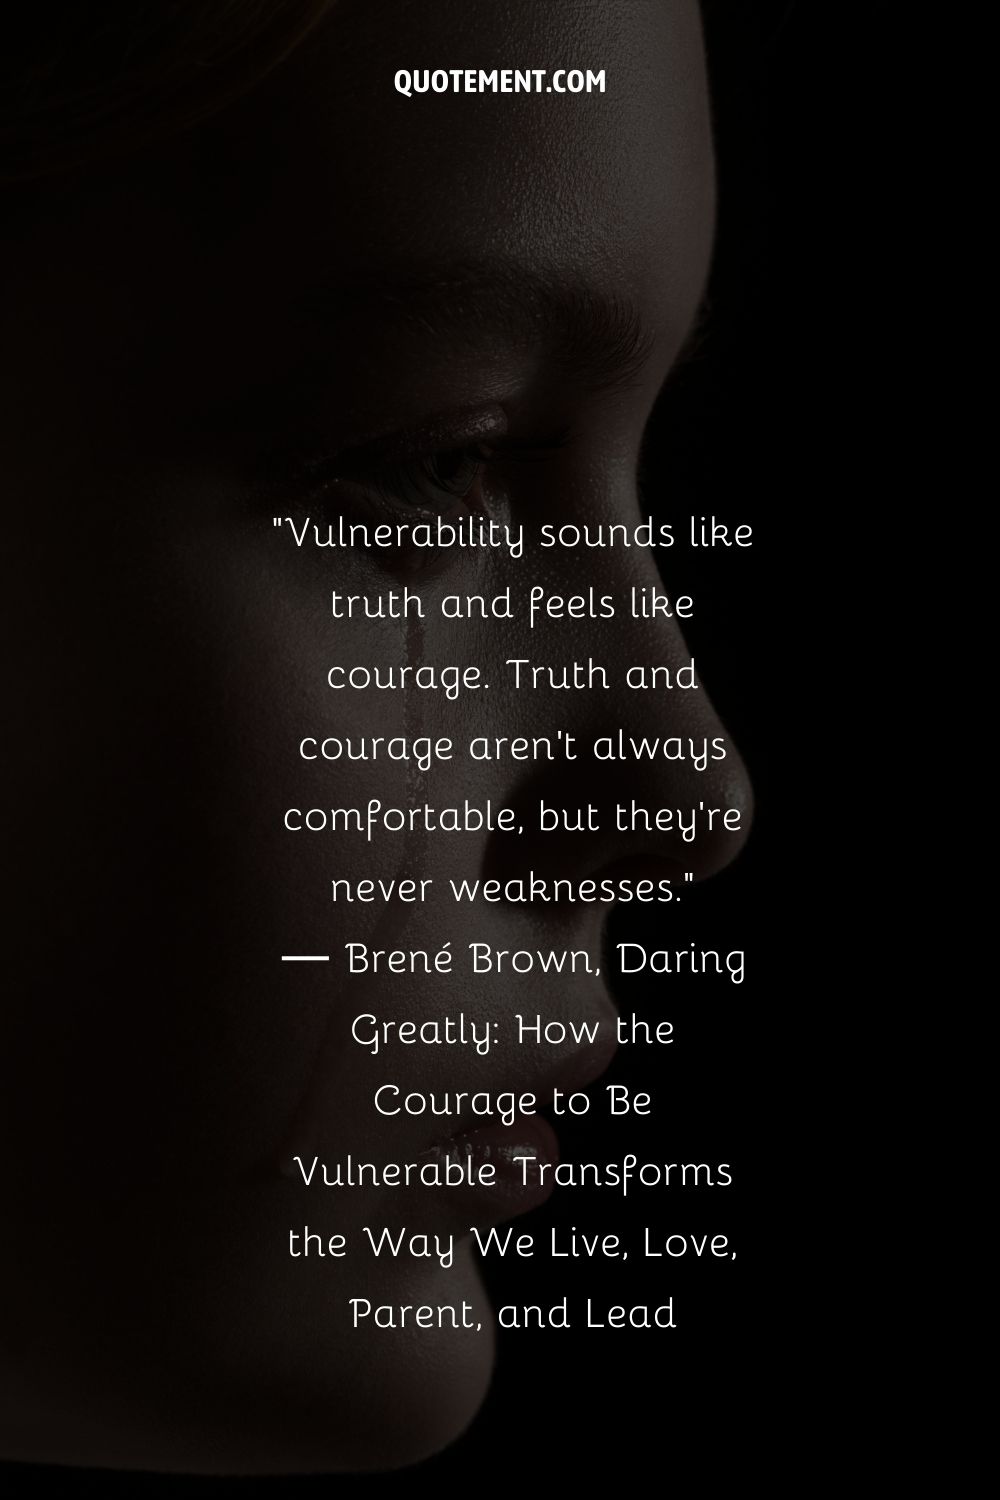 Vulnerability sounds like truth and feels like courage